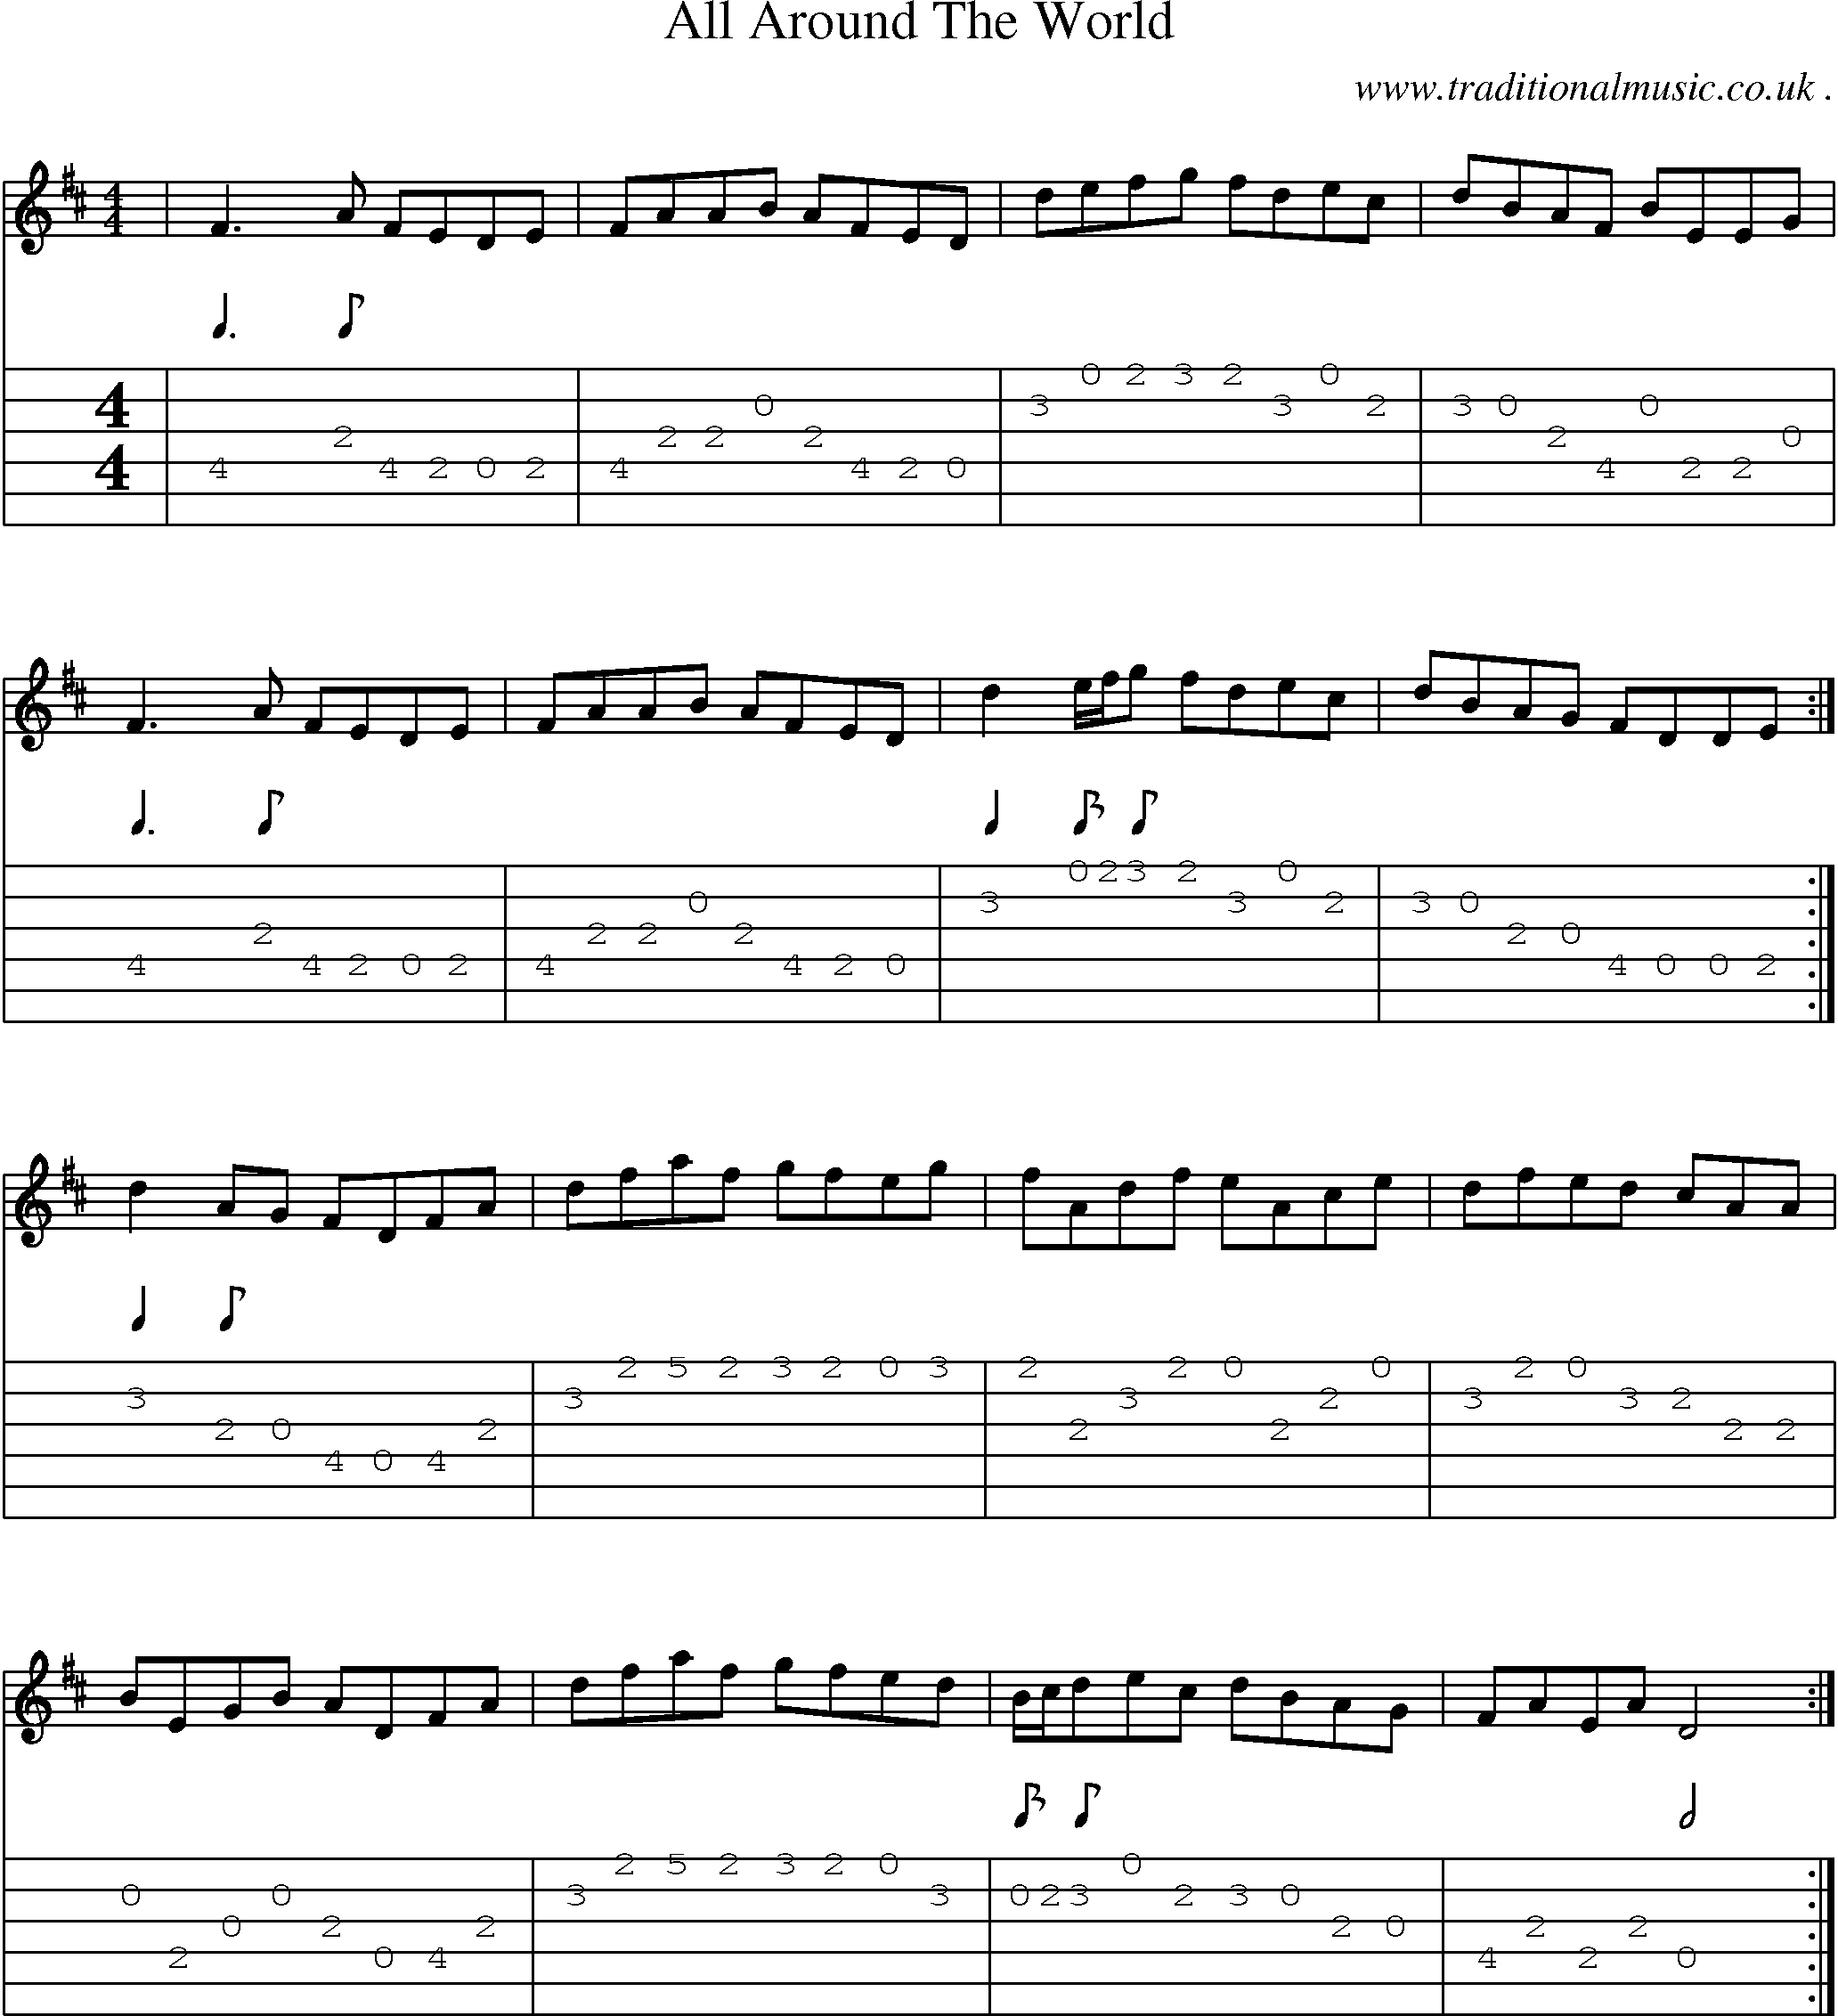 Sheet-Music and Guitar Tabs for All Around The World